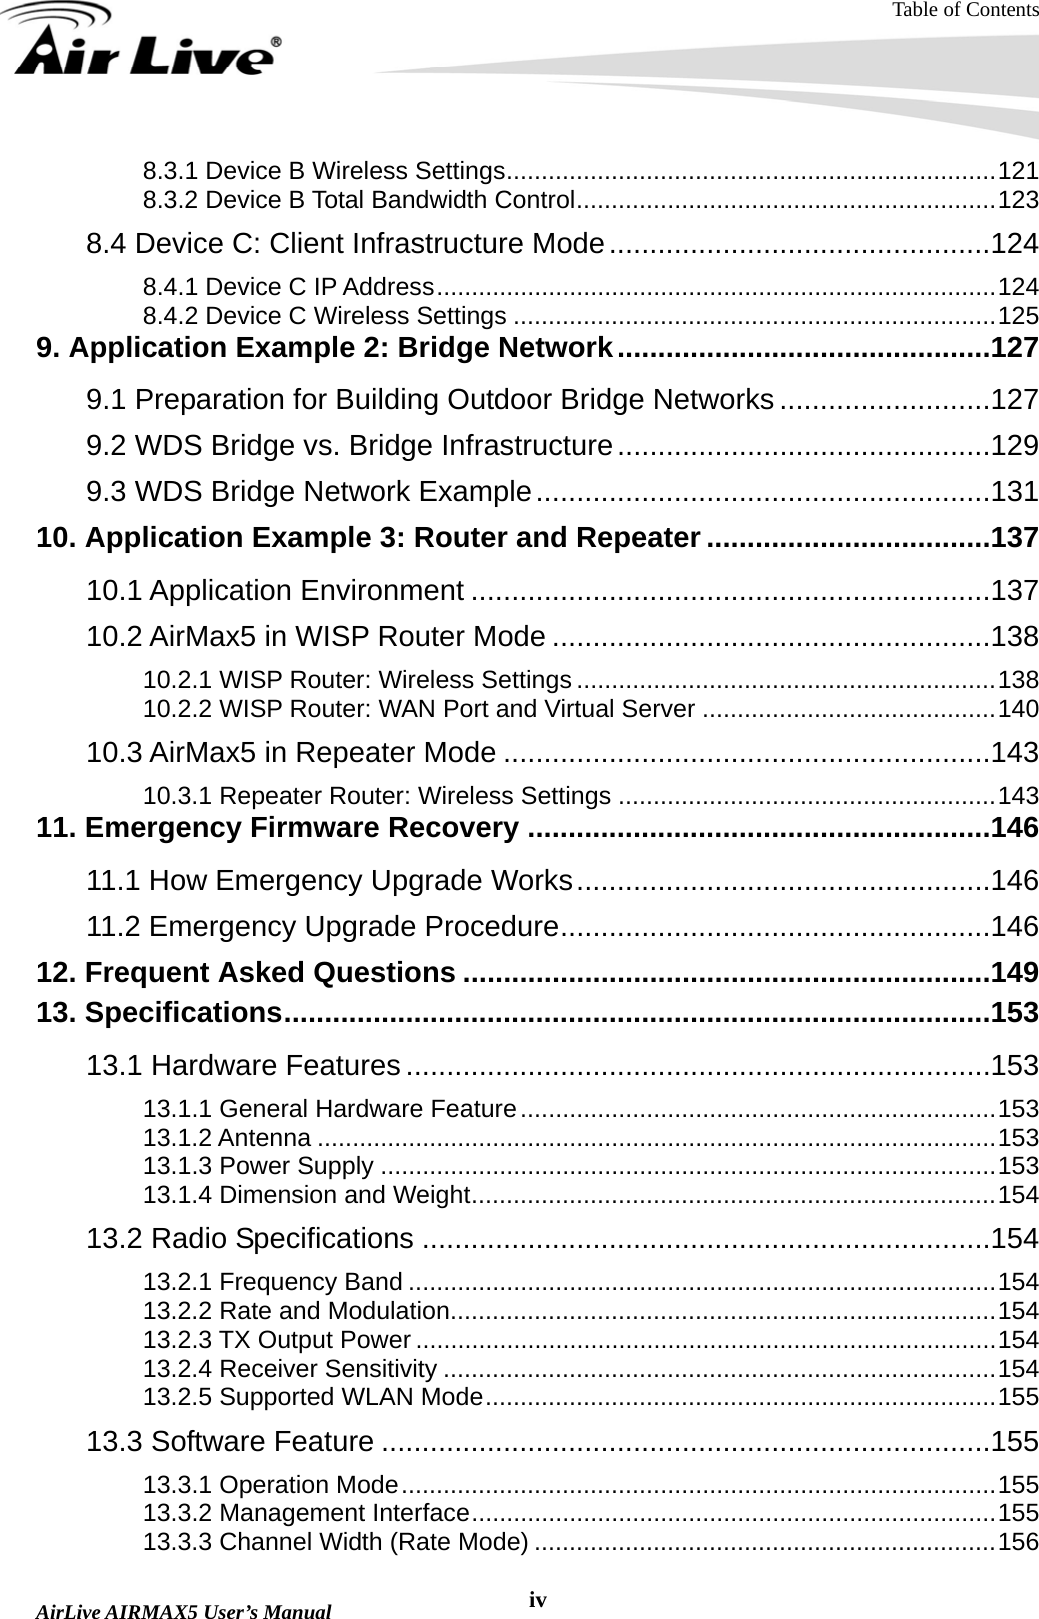 Table of Contents  AirLive AIRMAX5 User’s Manual  iv8.3.1 Device B Wireless Settings......................................................................121 8.3.2 Device B Total Bandwidth Control............................................................123 8.4 Device C: Client Infrastructure Mode...............................................124 8.4.1 Device C IP Address................................................................................124 8.4.2 Device C Wireless Settings .....................................................................125 9. Application Example 2: Bridge Network..............................................127 9.1 Preparation for Building Outdoor Bridge Networks ..........................127 9.2 WDS Bridge vs. Bridge Infrastructure..............................................129 9.3 WDS Bridge Network Example........................................................131 10. Application Example 3: Router and Repeater ...................................137 10.1 Application Environment ................................................................137 10.2 AirMax5 in WISP Router Mode ......................................................138 10.2.1 WISP Router: Wireless Settings ............................................................138 10.2.2 WISP Router: WAN Port and Virtual Server ..........................................140 10.3 AirMax5 in Repeater Mode ............................................................143 10.3.1 Repeater Router: Wireless Settings ......................................................143 11. Emergency Firmware Recovery .........................................................146 11.1 How Emergency Upgrade Works...................................................146 11.2 Emergency Upgrade Procedure.....................................................146 12. Frequent Asked Questions .................................................................149 13. Specifications.......................................................................................153 13.1 Hardware Features ........................................................................153 13.1.1 General Hardware Feature....................................................................153 13.1.2 Antenna .................................................................................................153 13.1.3 Power Supply ........................................................................................153 13.1.4 Dimension and Weight...........................................................................154 13.2 Radio Specifications ......................................................................154 13.2.1 Frequency Band ....................................................................................154 13.2.2 Rate and Modulation..............................................................................154 13.2.3 TX Output Power ...................................................................................154 13.2.4 Receiver Sensitivity ...............................................................................154 13.2.5 Supported WLAN Mode.........................................................................155 13.3 Software Feature ...........................................................................155 13.3.1 Operation Mode.....................................................................................155 13.3.2 Management Interface...........................................................................155 13.3.3 Channel Width (Rate Mode) ..................................................................156 